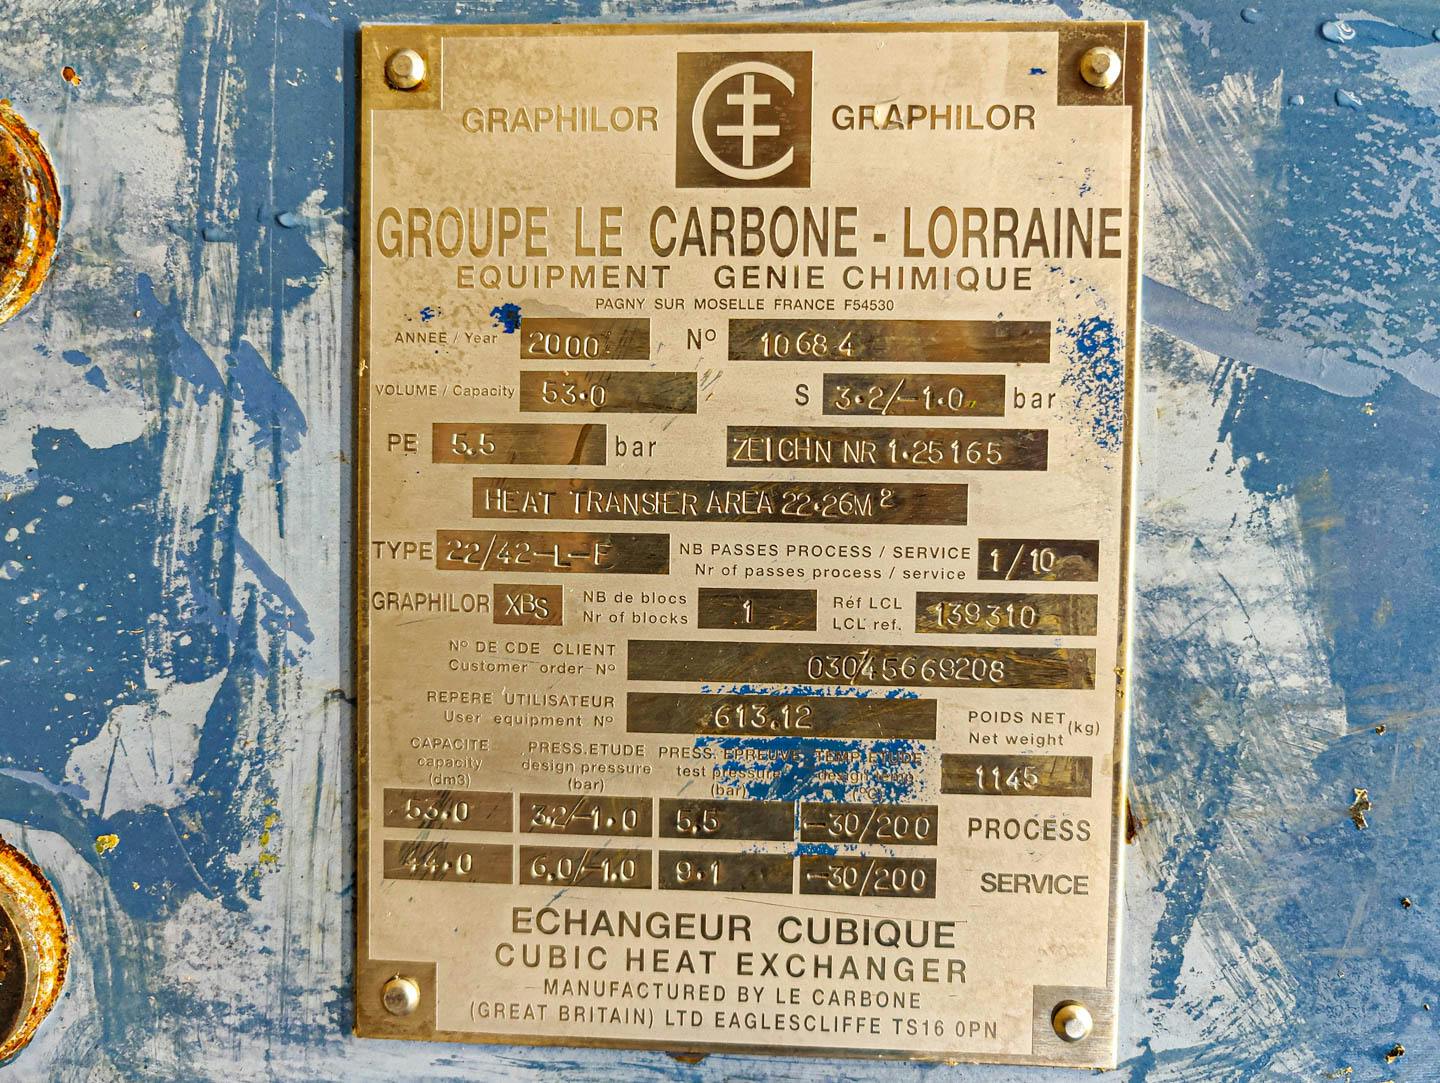 Le Carbone-Lorraine NK22/42-L-F - Shell and tube heat exchanger - image 8